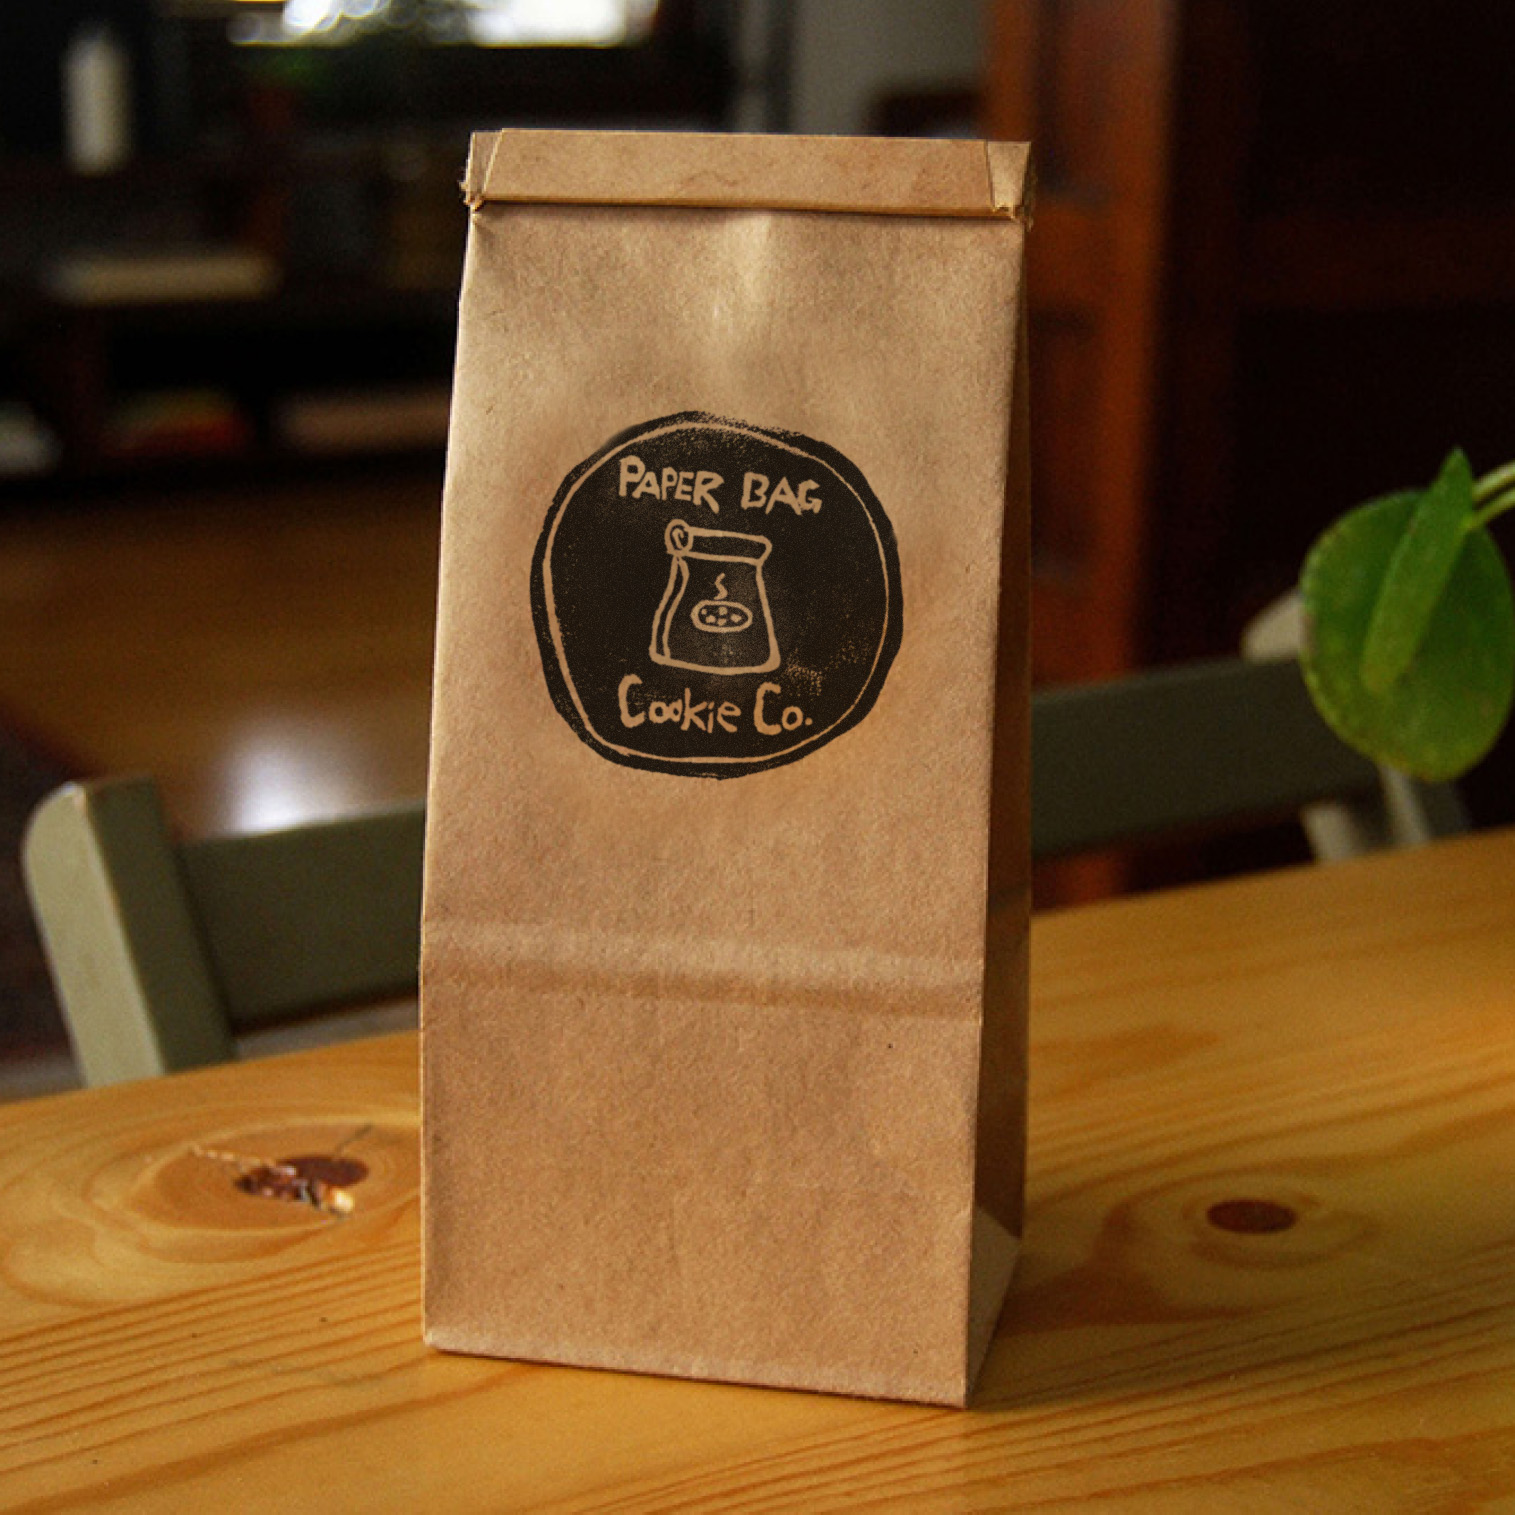 Paper Bag Cookie Co bag on table